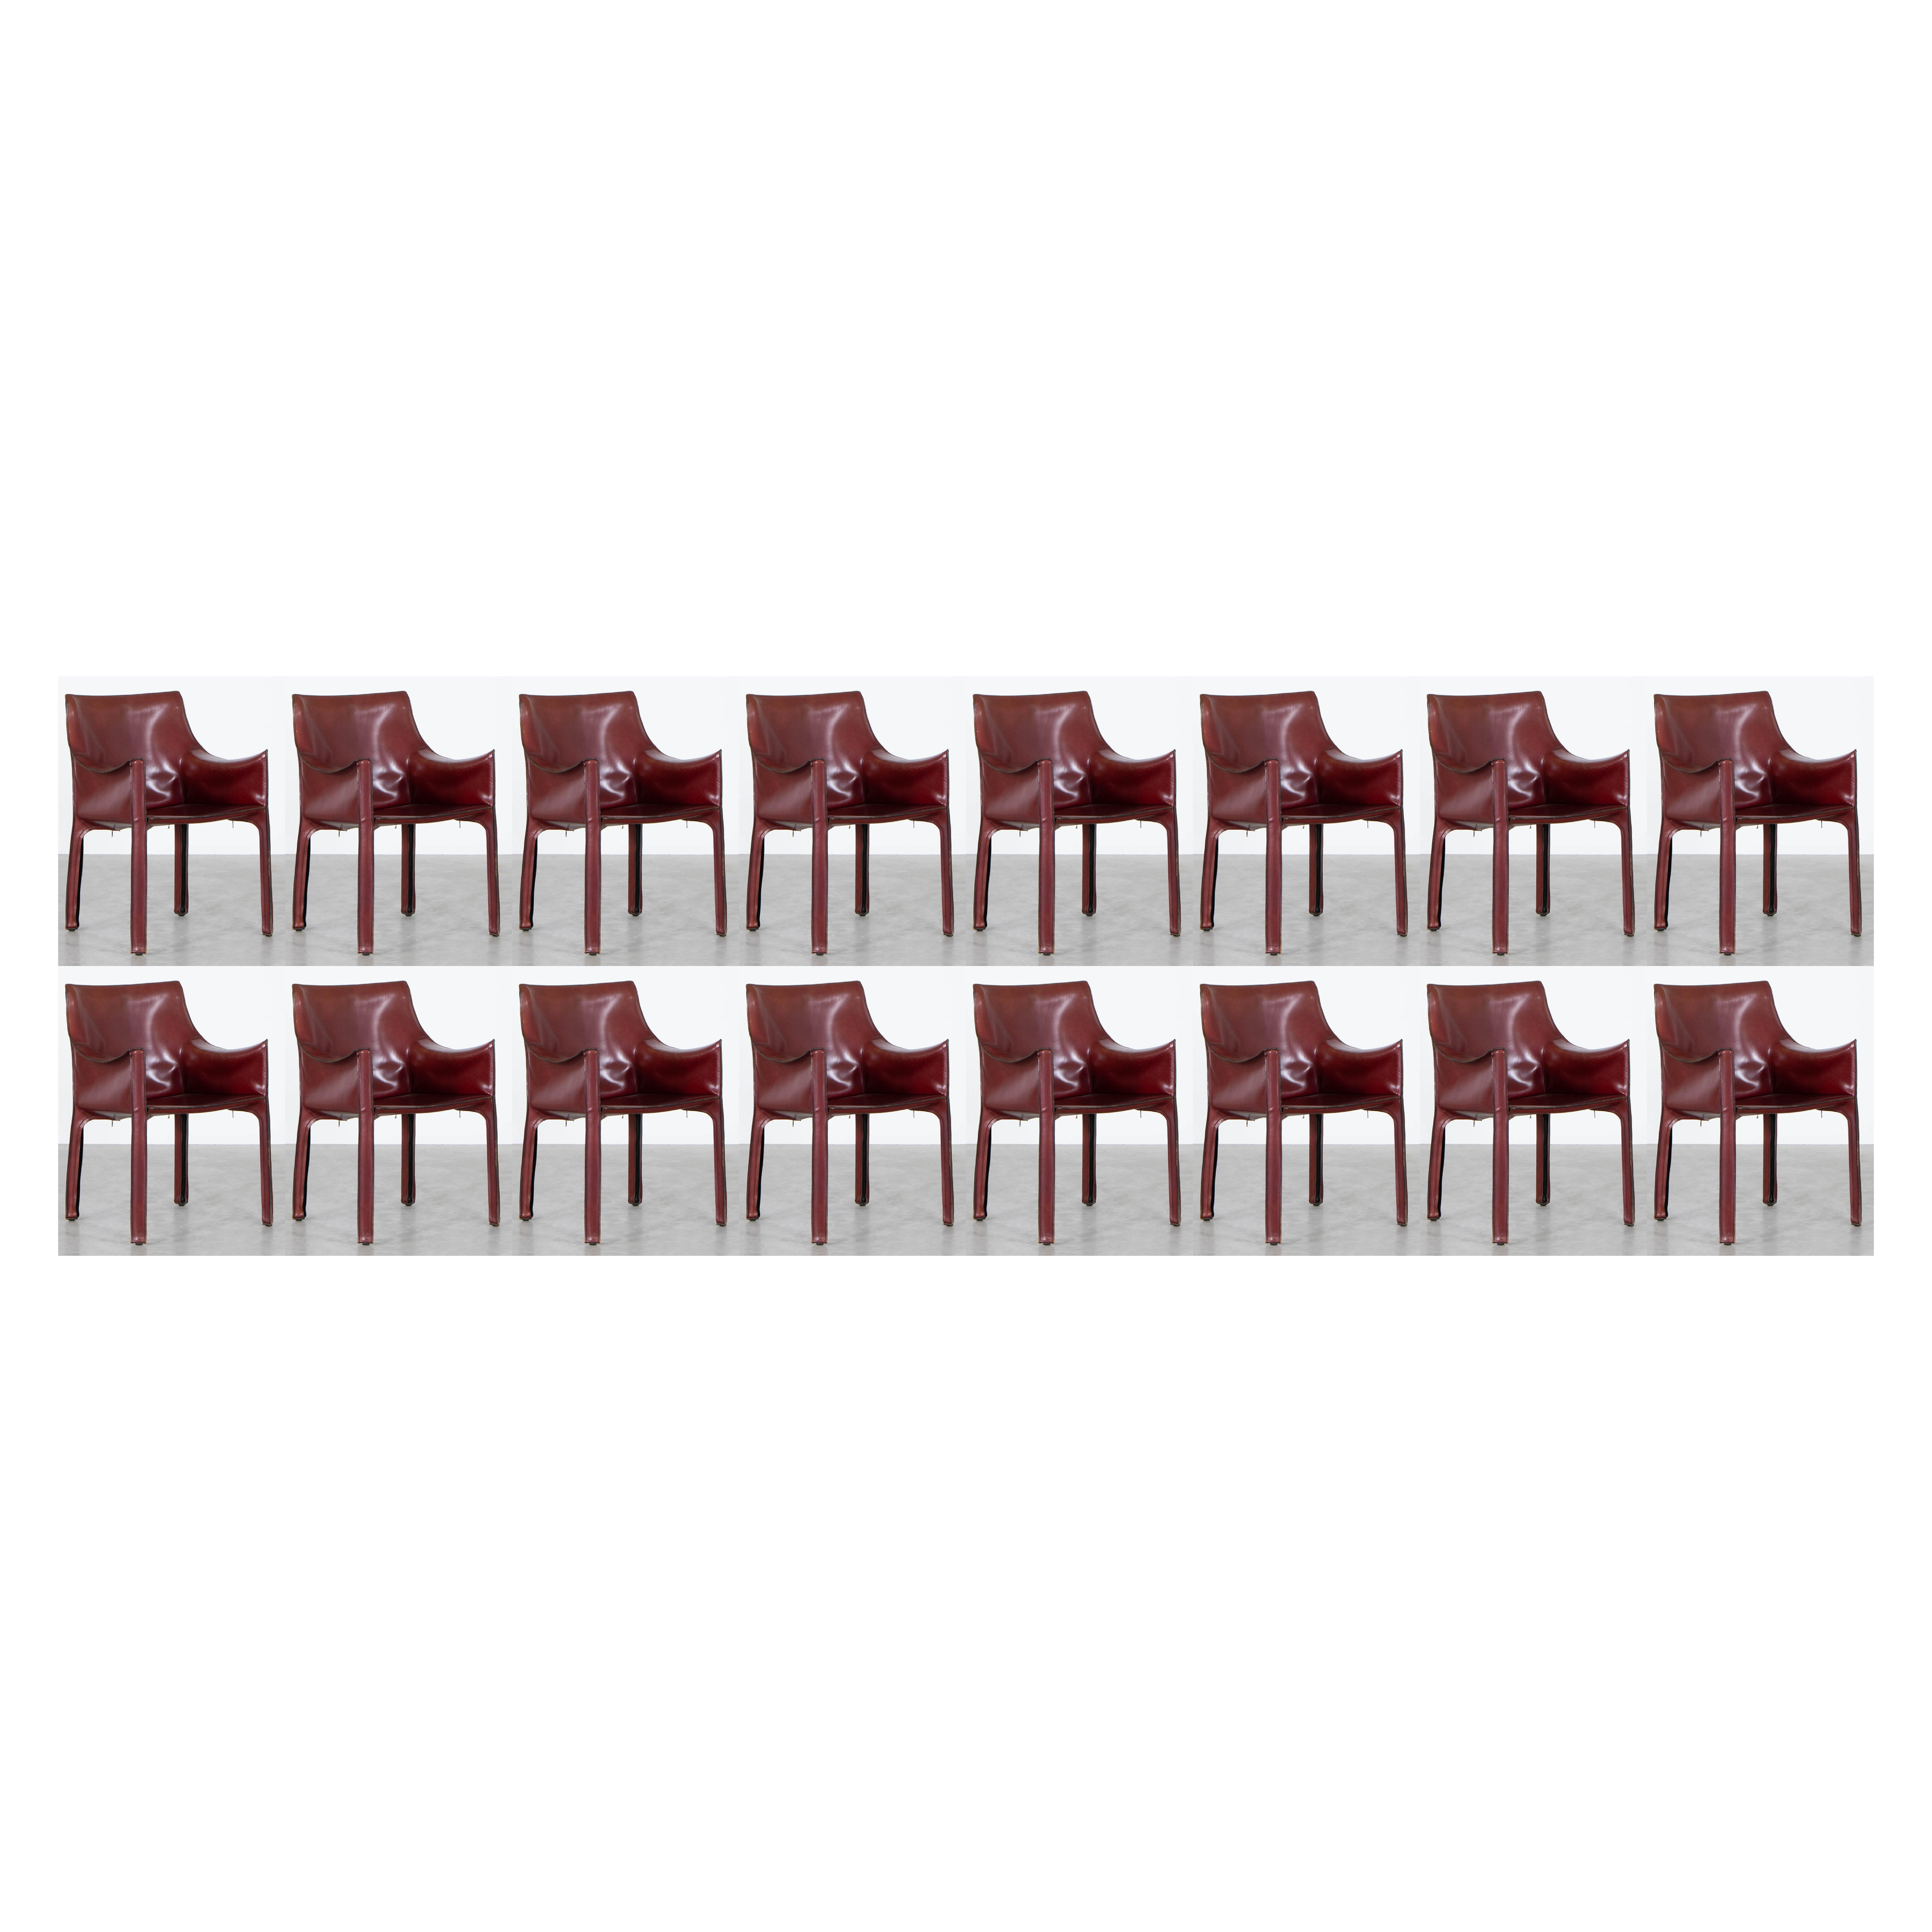 Mario Bellini "CAB 413" Chairs for Cassina in Bordeaux, 1977, Set of 16